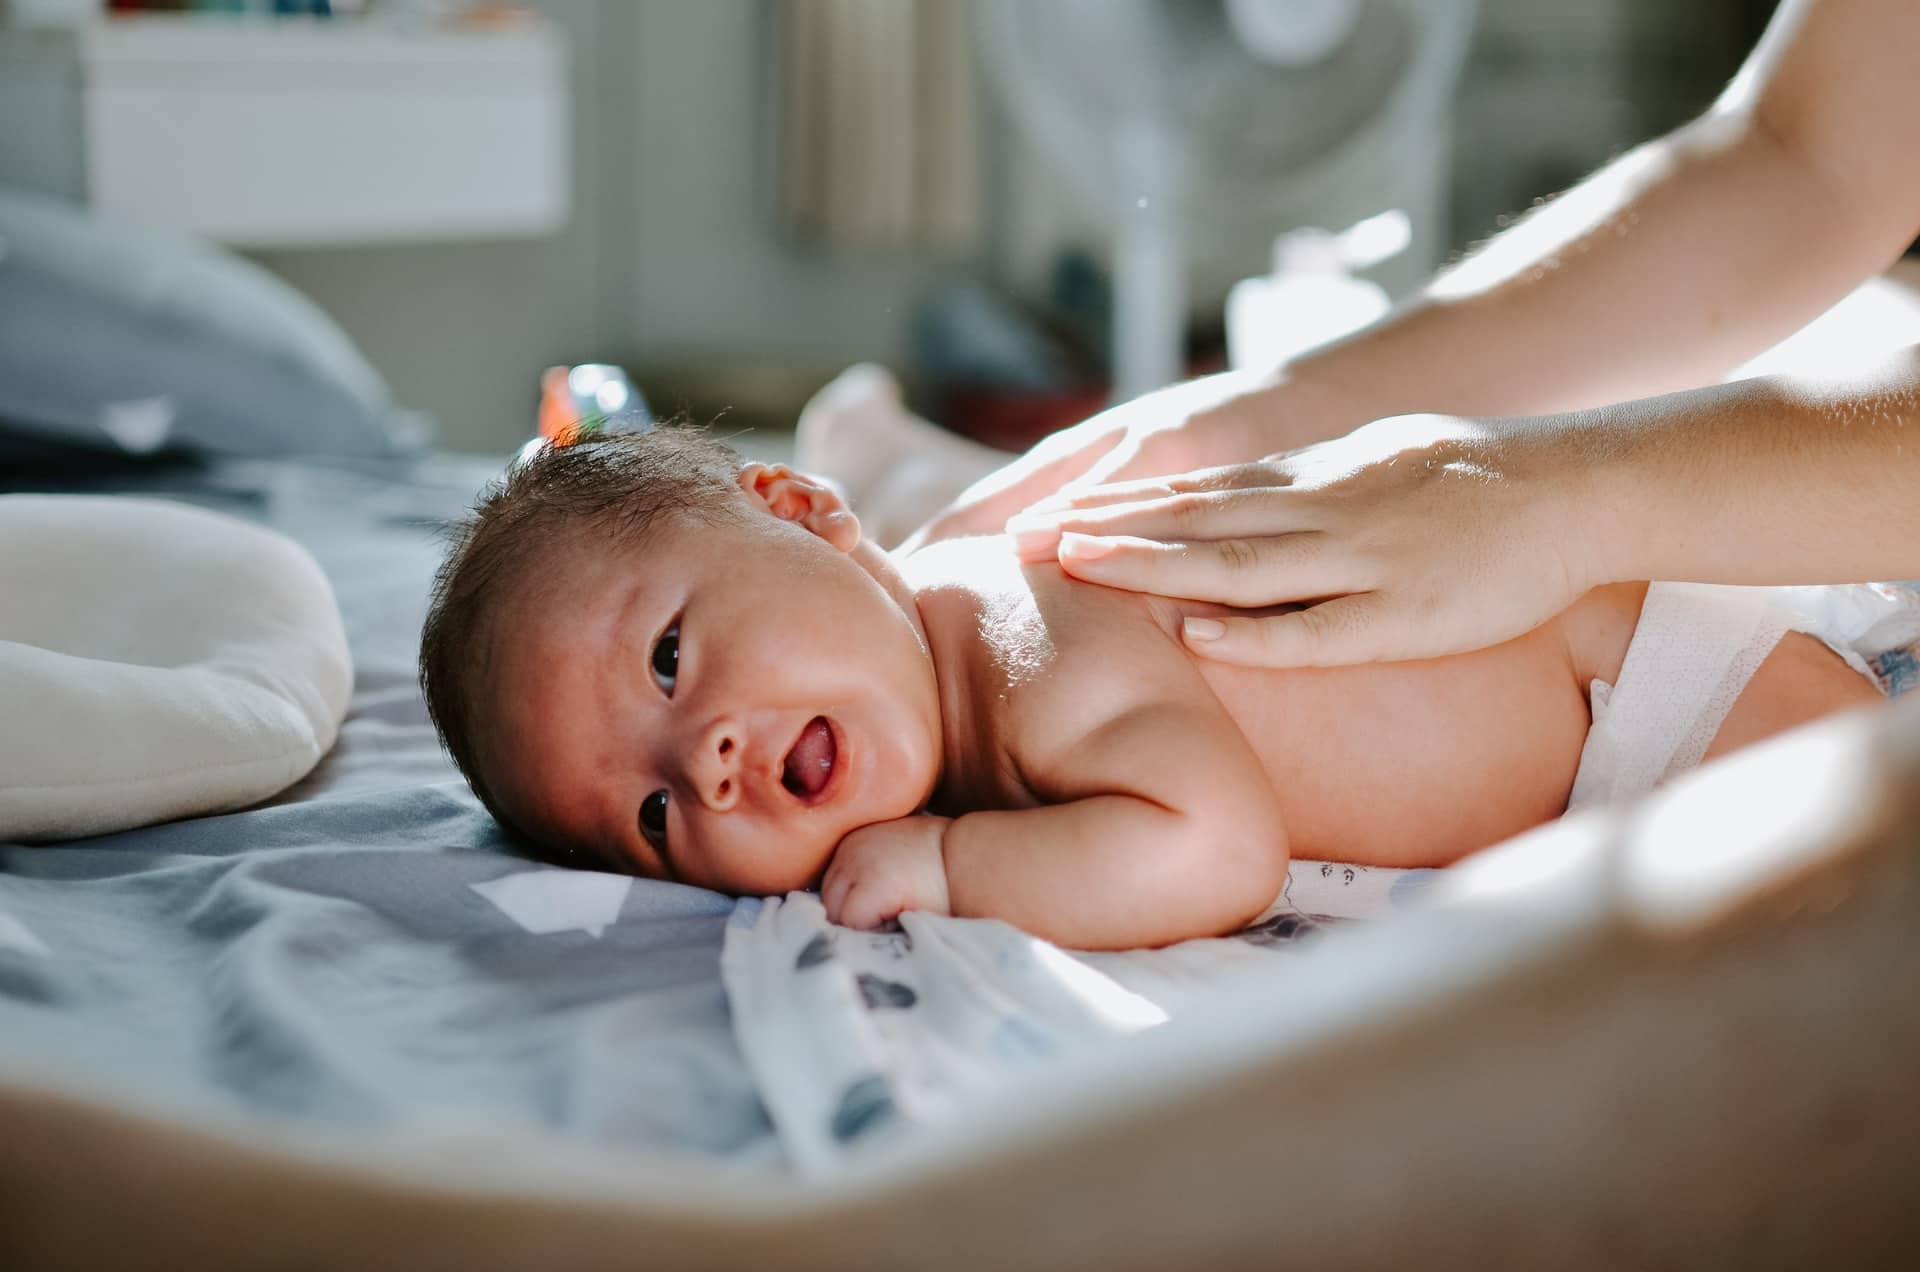 khoa pham 9nC7j1gAS84 unsplash1 - Ultimate Guide To Baby Massage: Benefits, Techniques and How to do